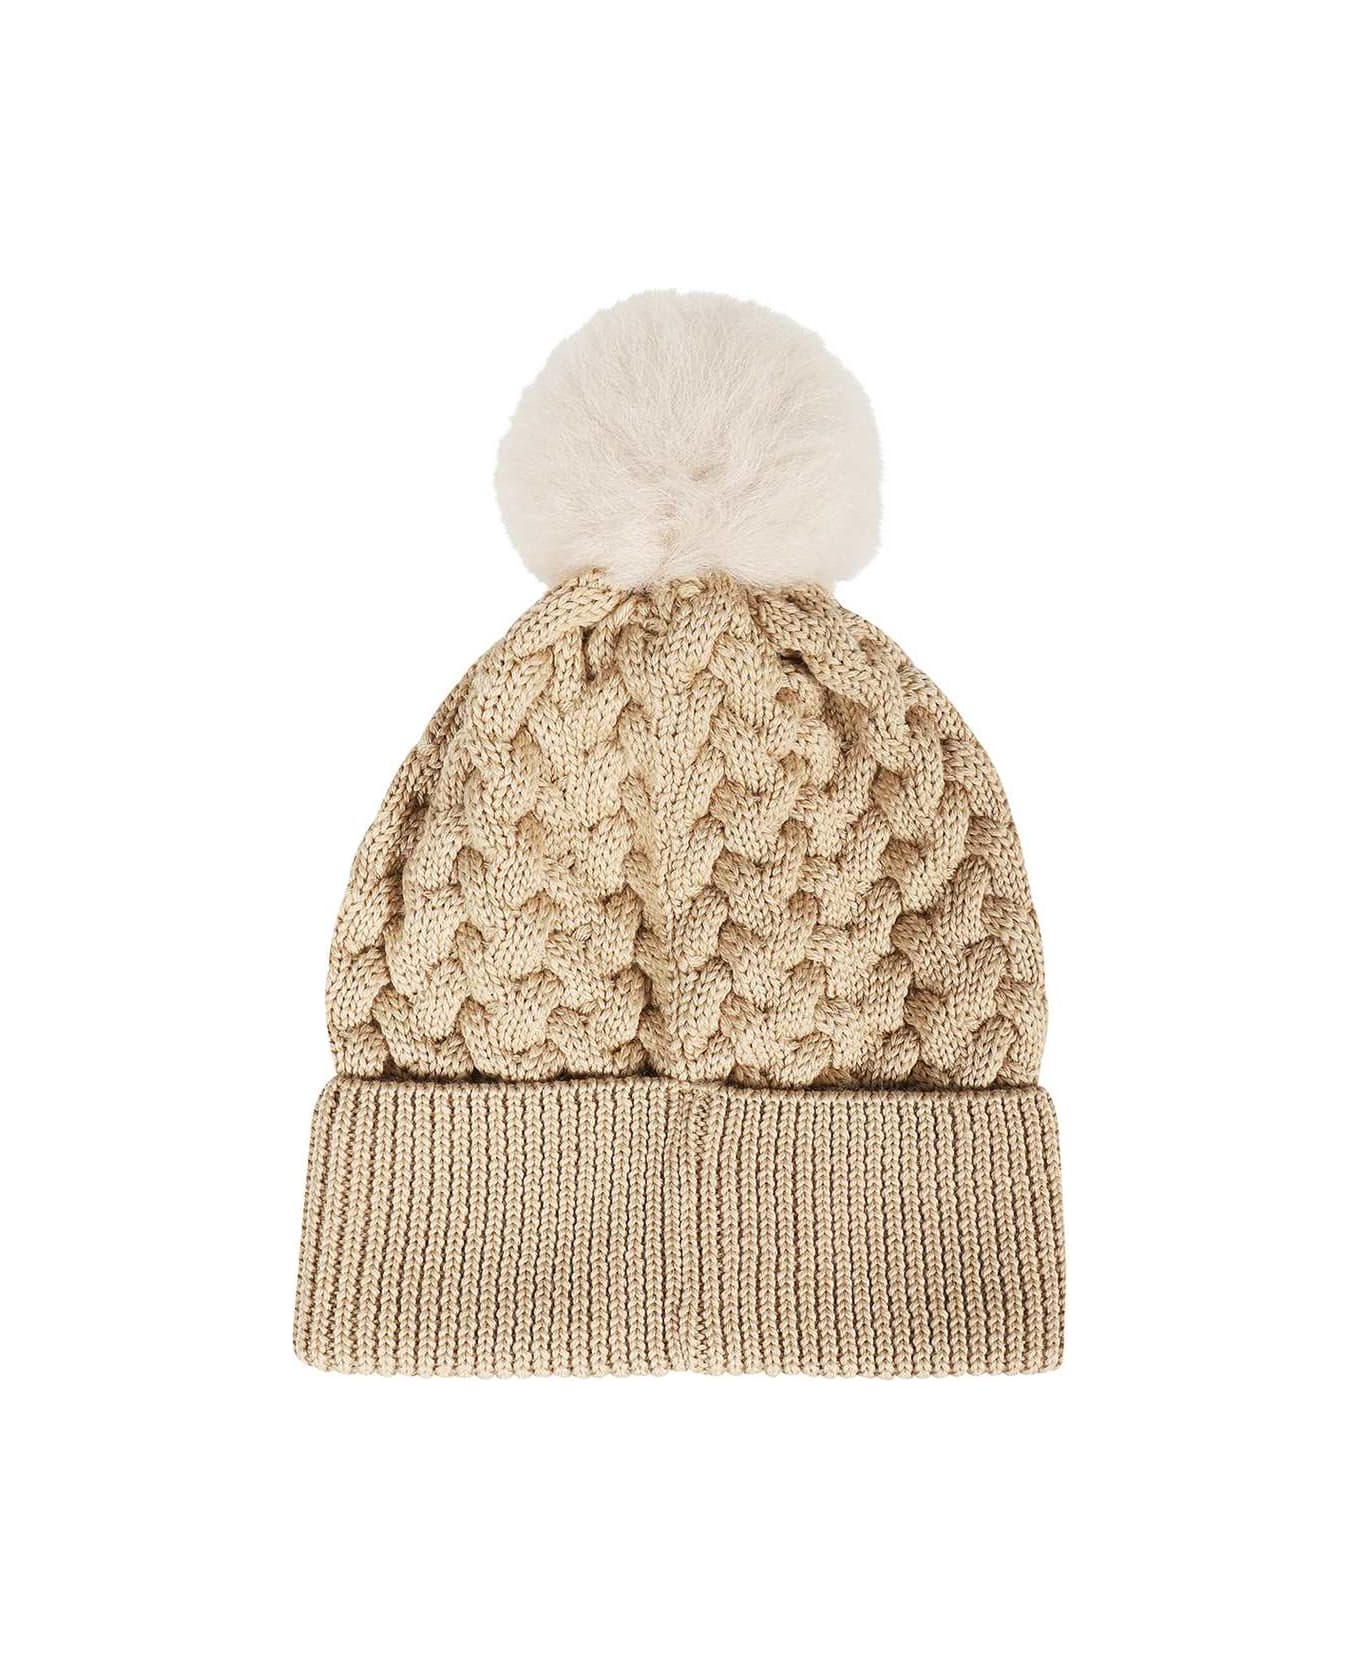 Parajumpers Knitted Beanie With Pom-pom - Camel 帽子